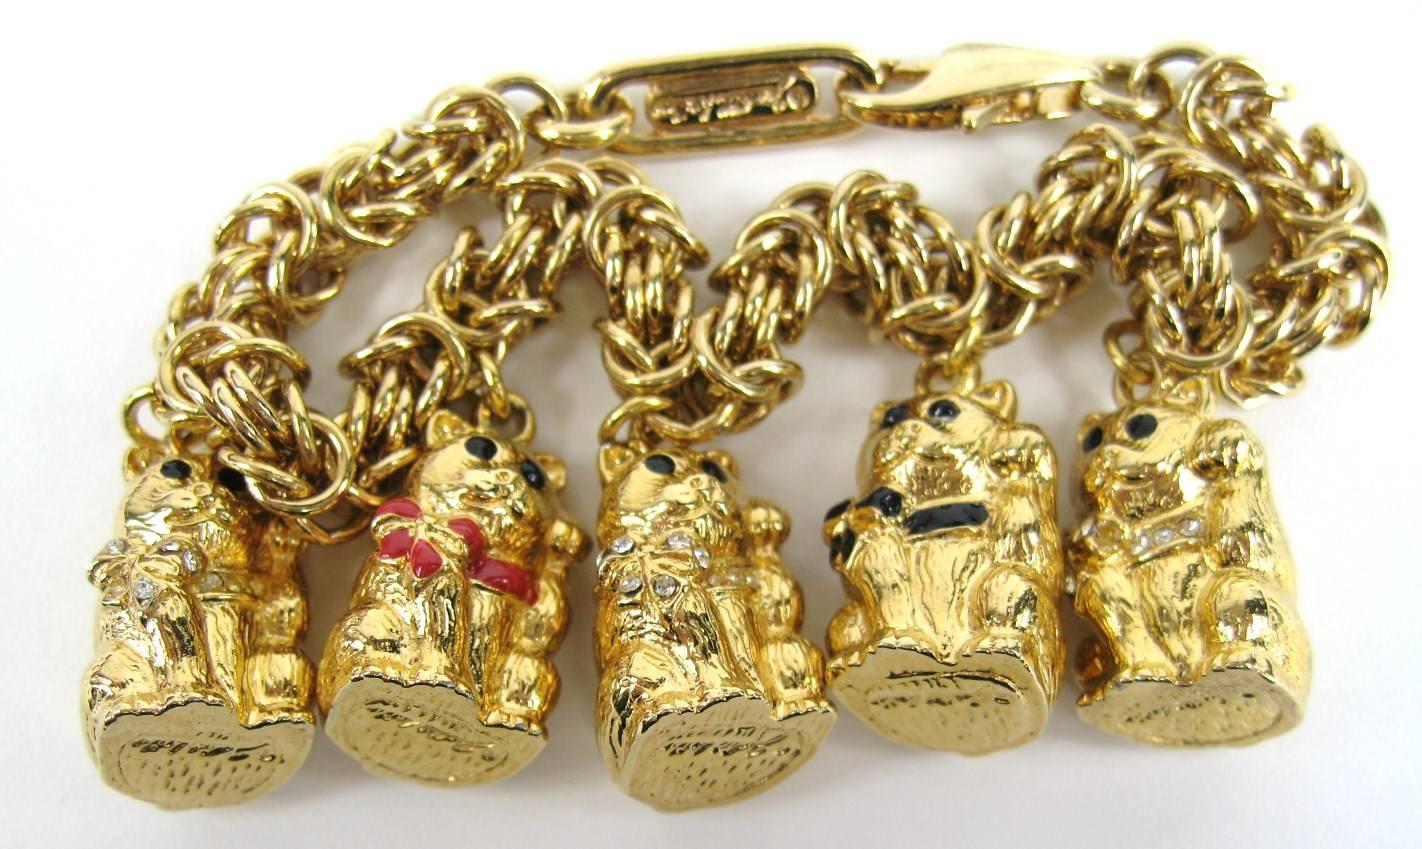 New Never worn Judith Leiber Charm Bracelet. Alternating bows and the adorable bears with Swarovski Crystals set in the bows. Will fit a 6 to 7-1/4 in wrist nicely. Has Original Box. This is out of a massive collection of Hopi, Zuni, Navajo,